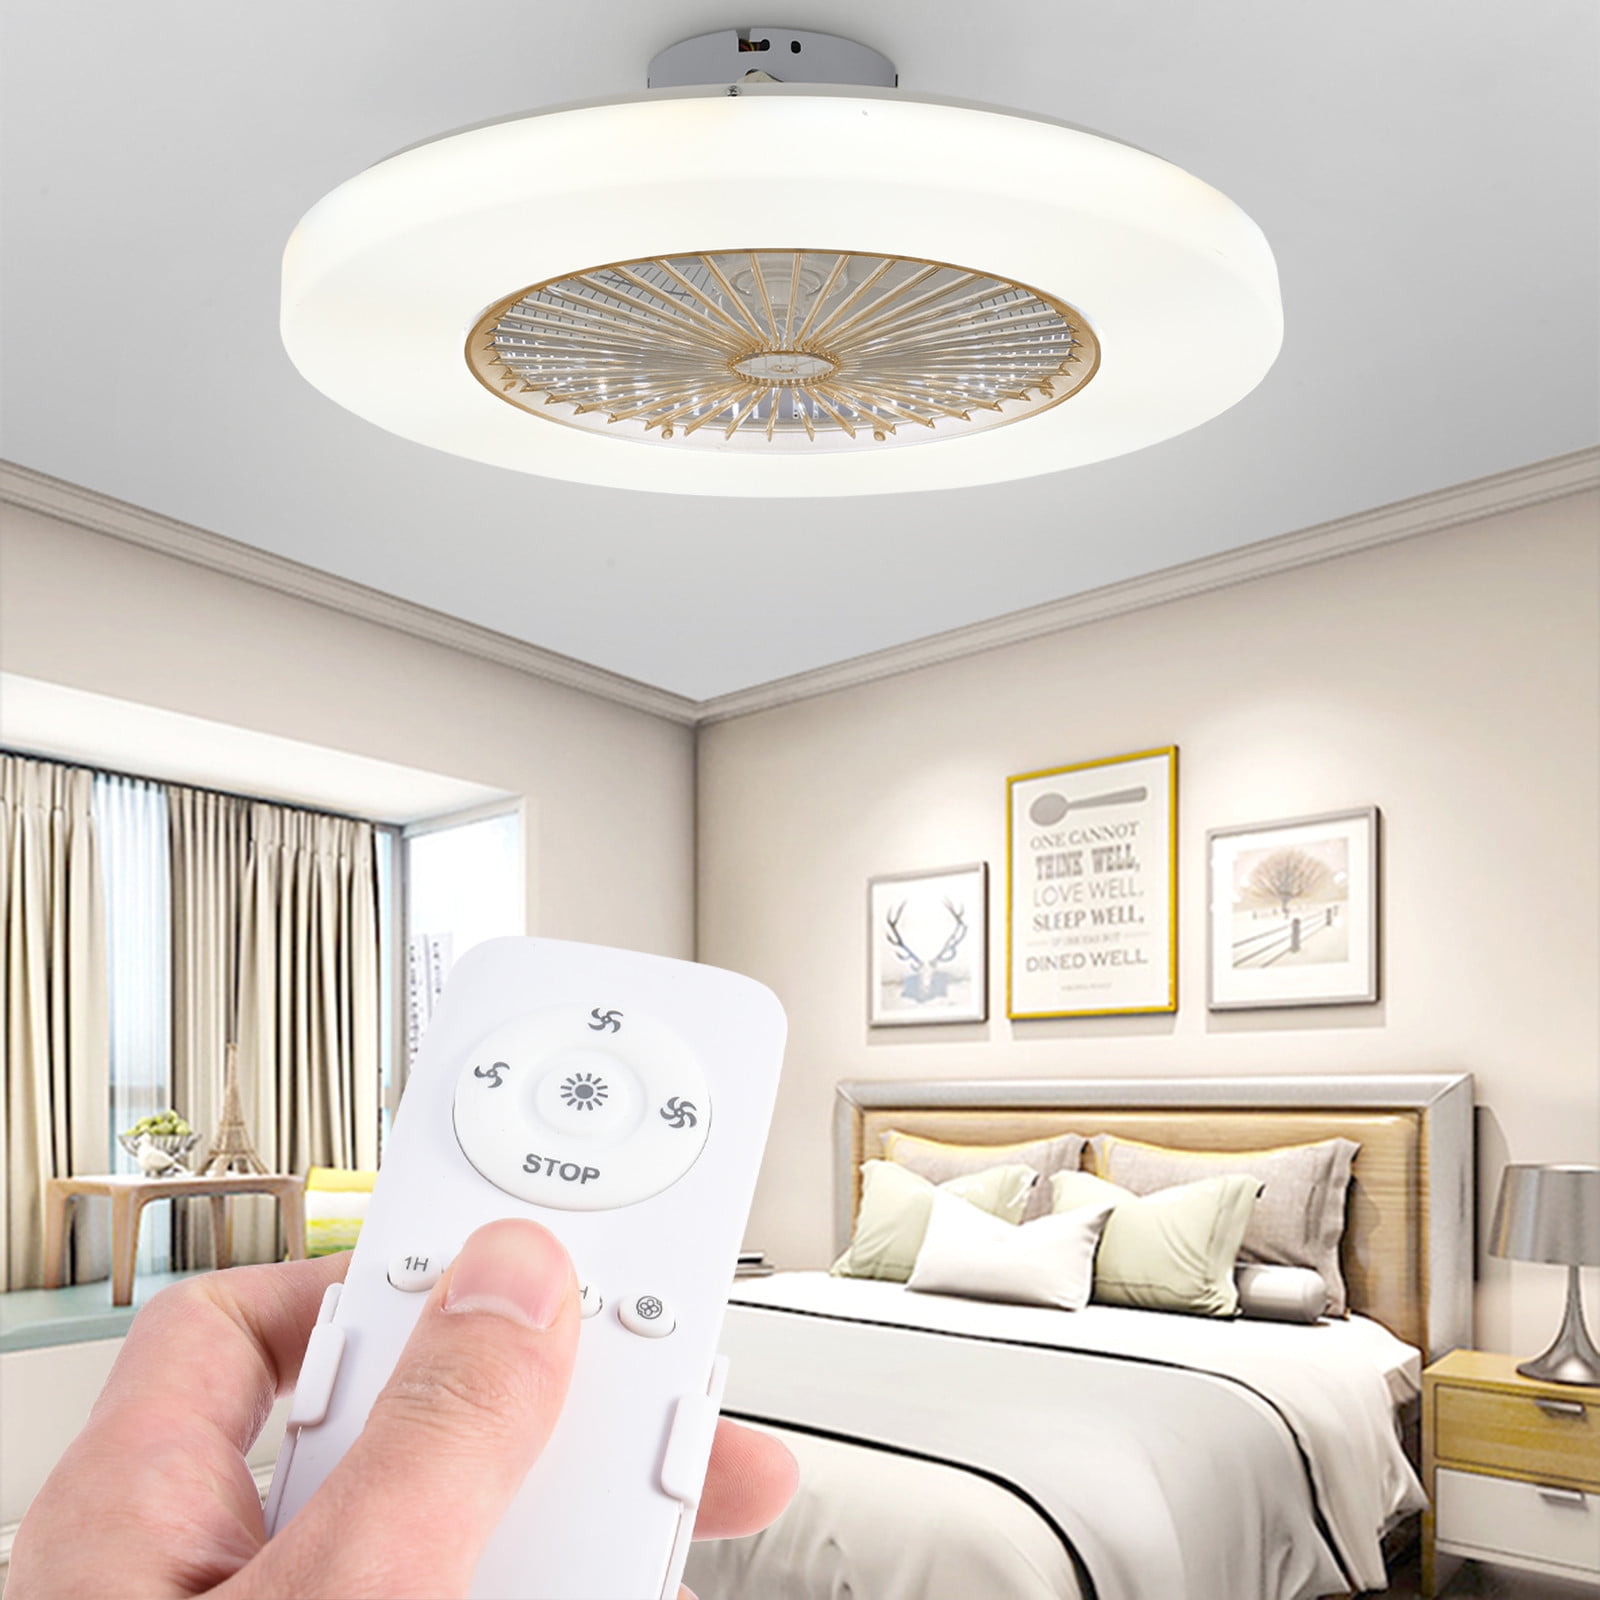 Details about   Ceiling Fan With Light Kit Remote Control LED Lamps Dimmable Bedroom Office 